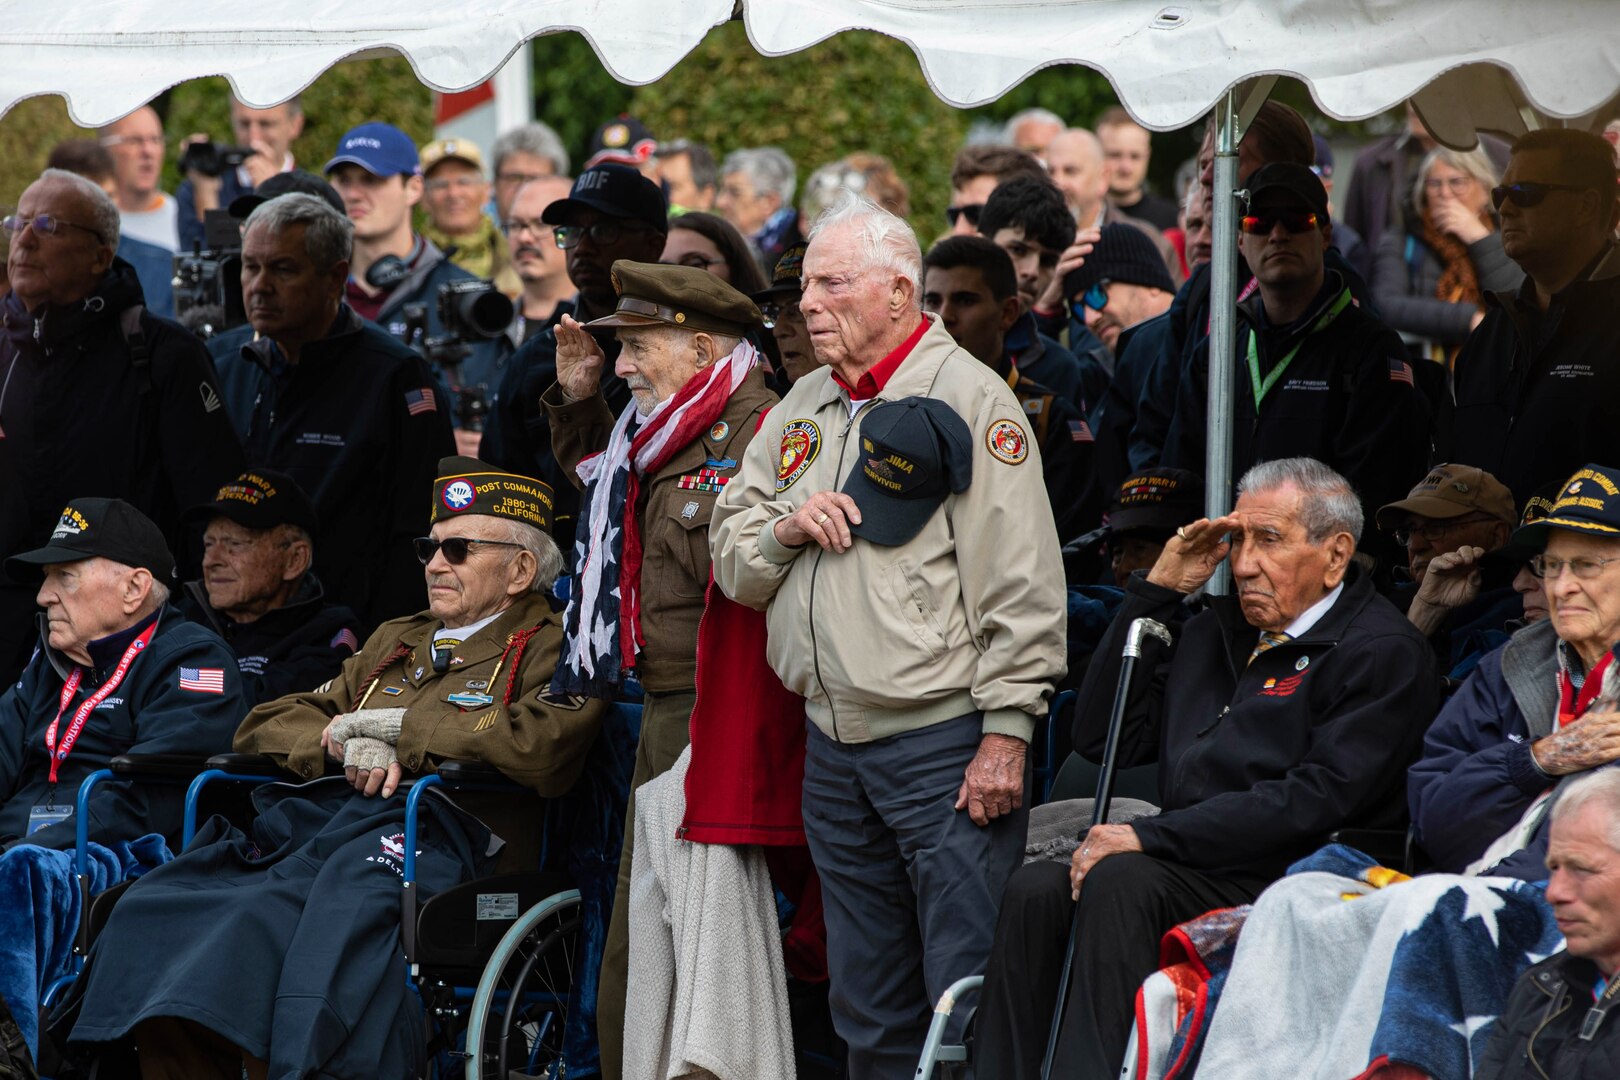 A group of World War II veterans and others, some seated, others standing, salute and pay respects during a ceremony.